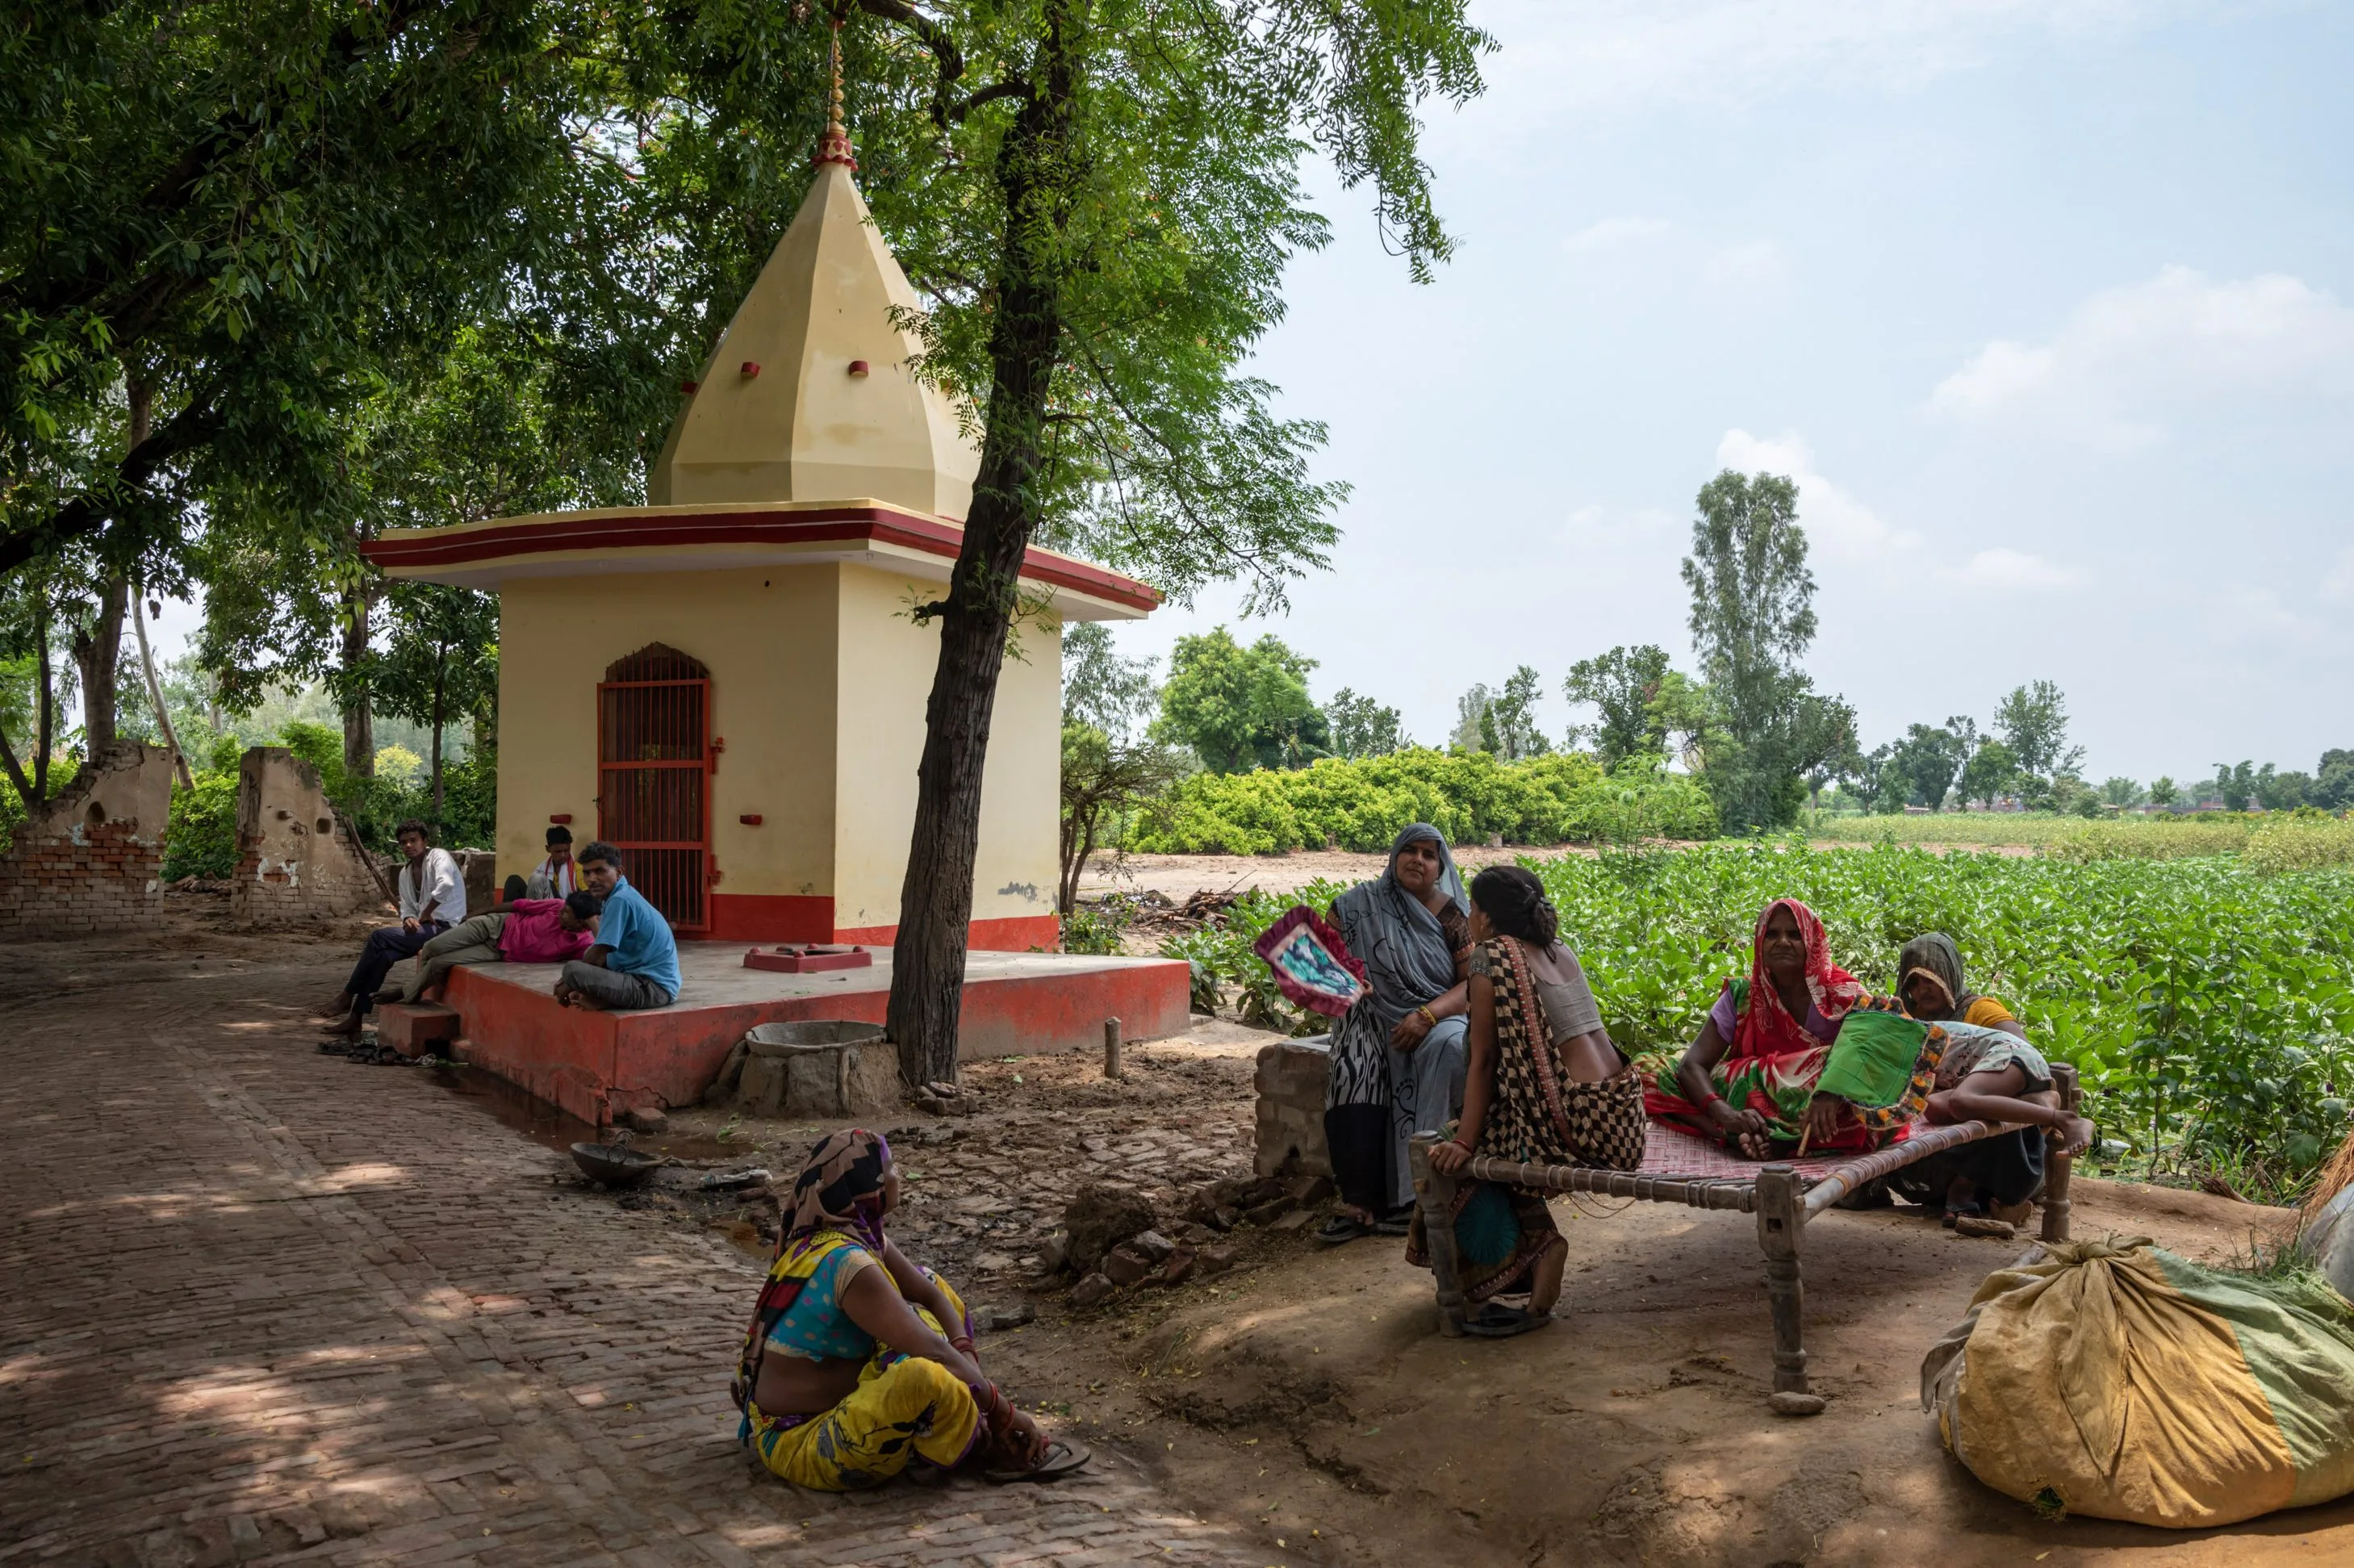 Life in a village without air conditioning under nearly 50 degrees Celsius